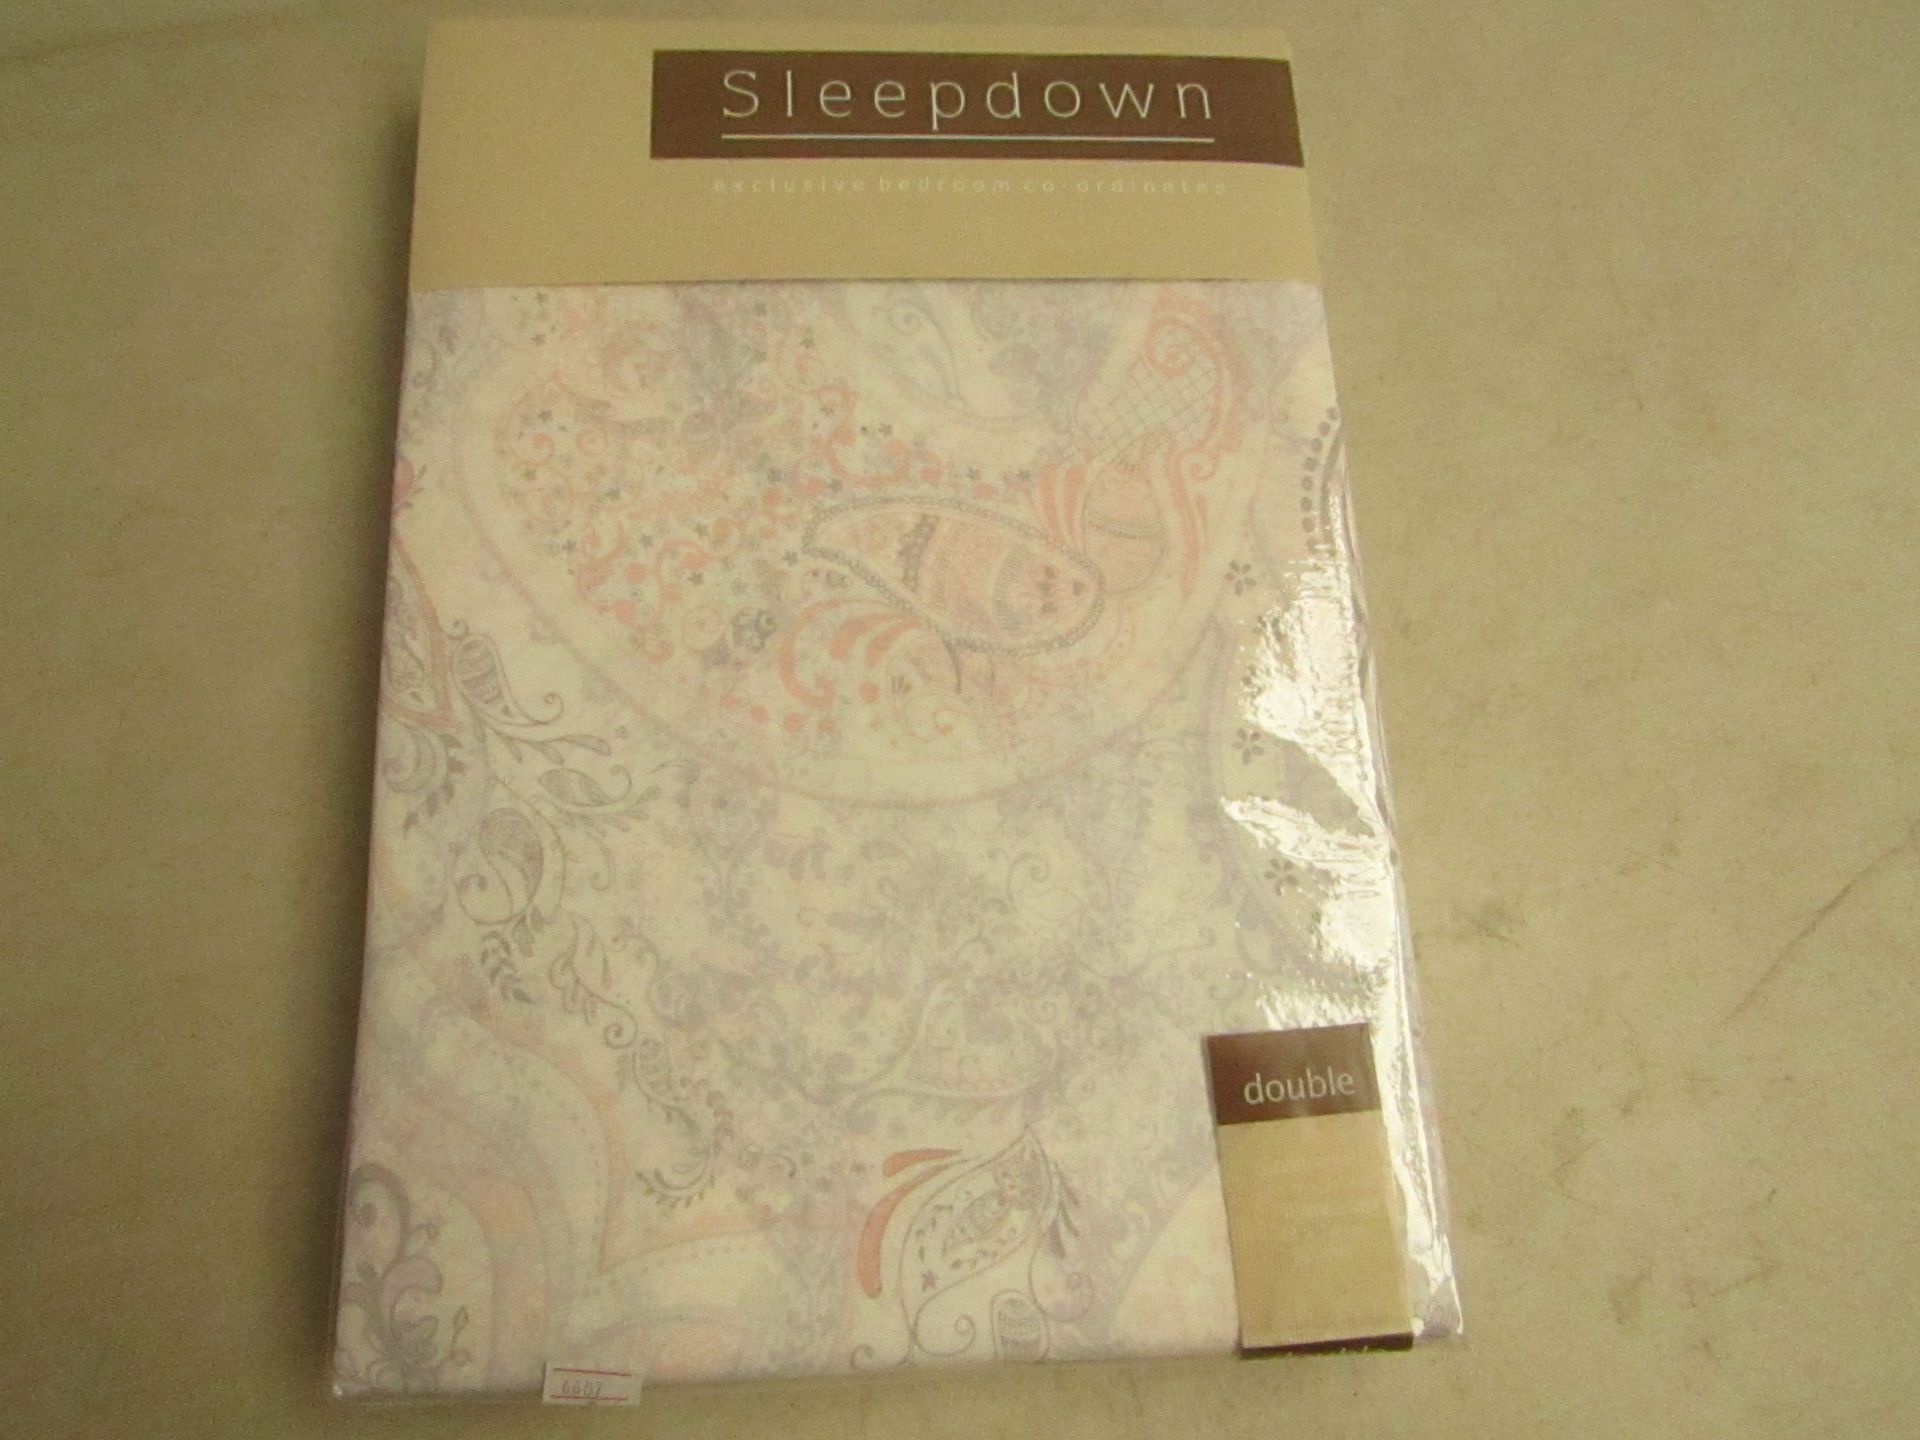 Sleepdown double duvet cover with 2x pillowcases, brand new and packaged. Please see picture for